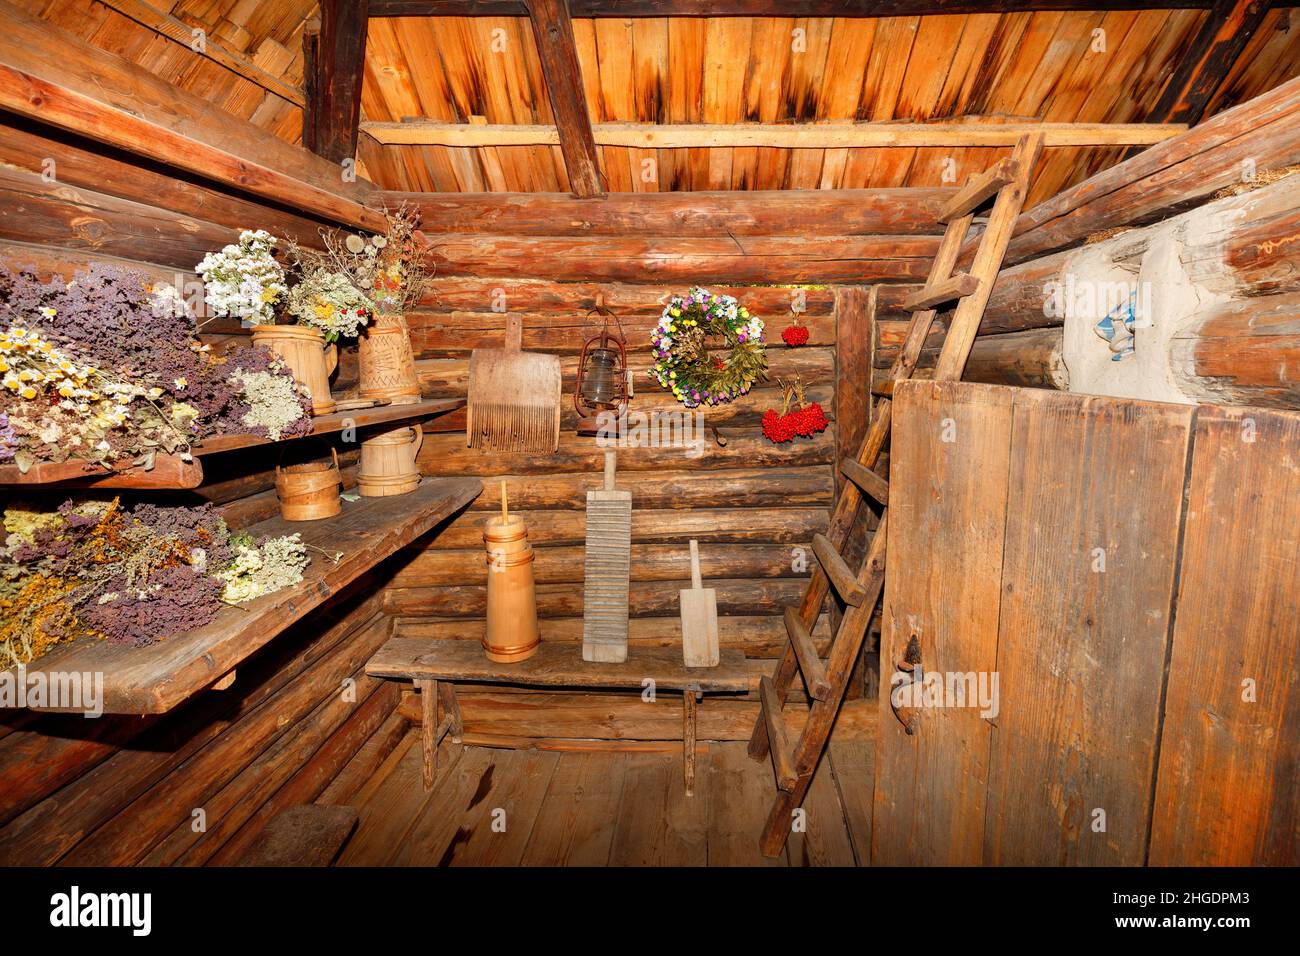 The utility room and the entrance hall of an old rural hut are filled with various household wooden utensils. Stock Photo